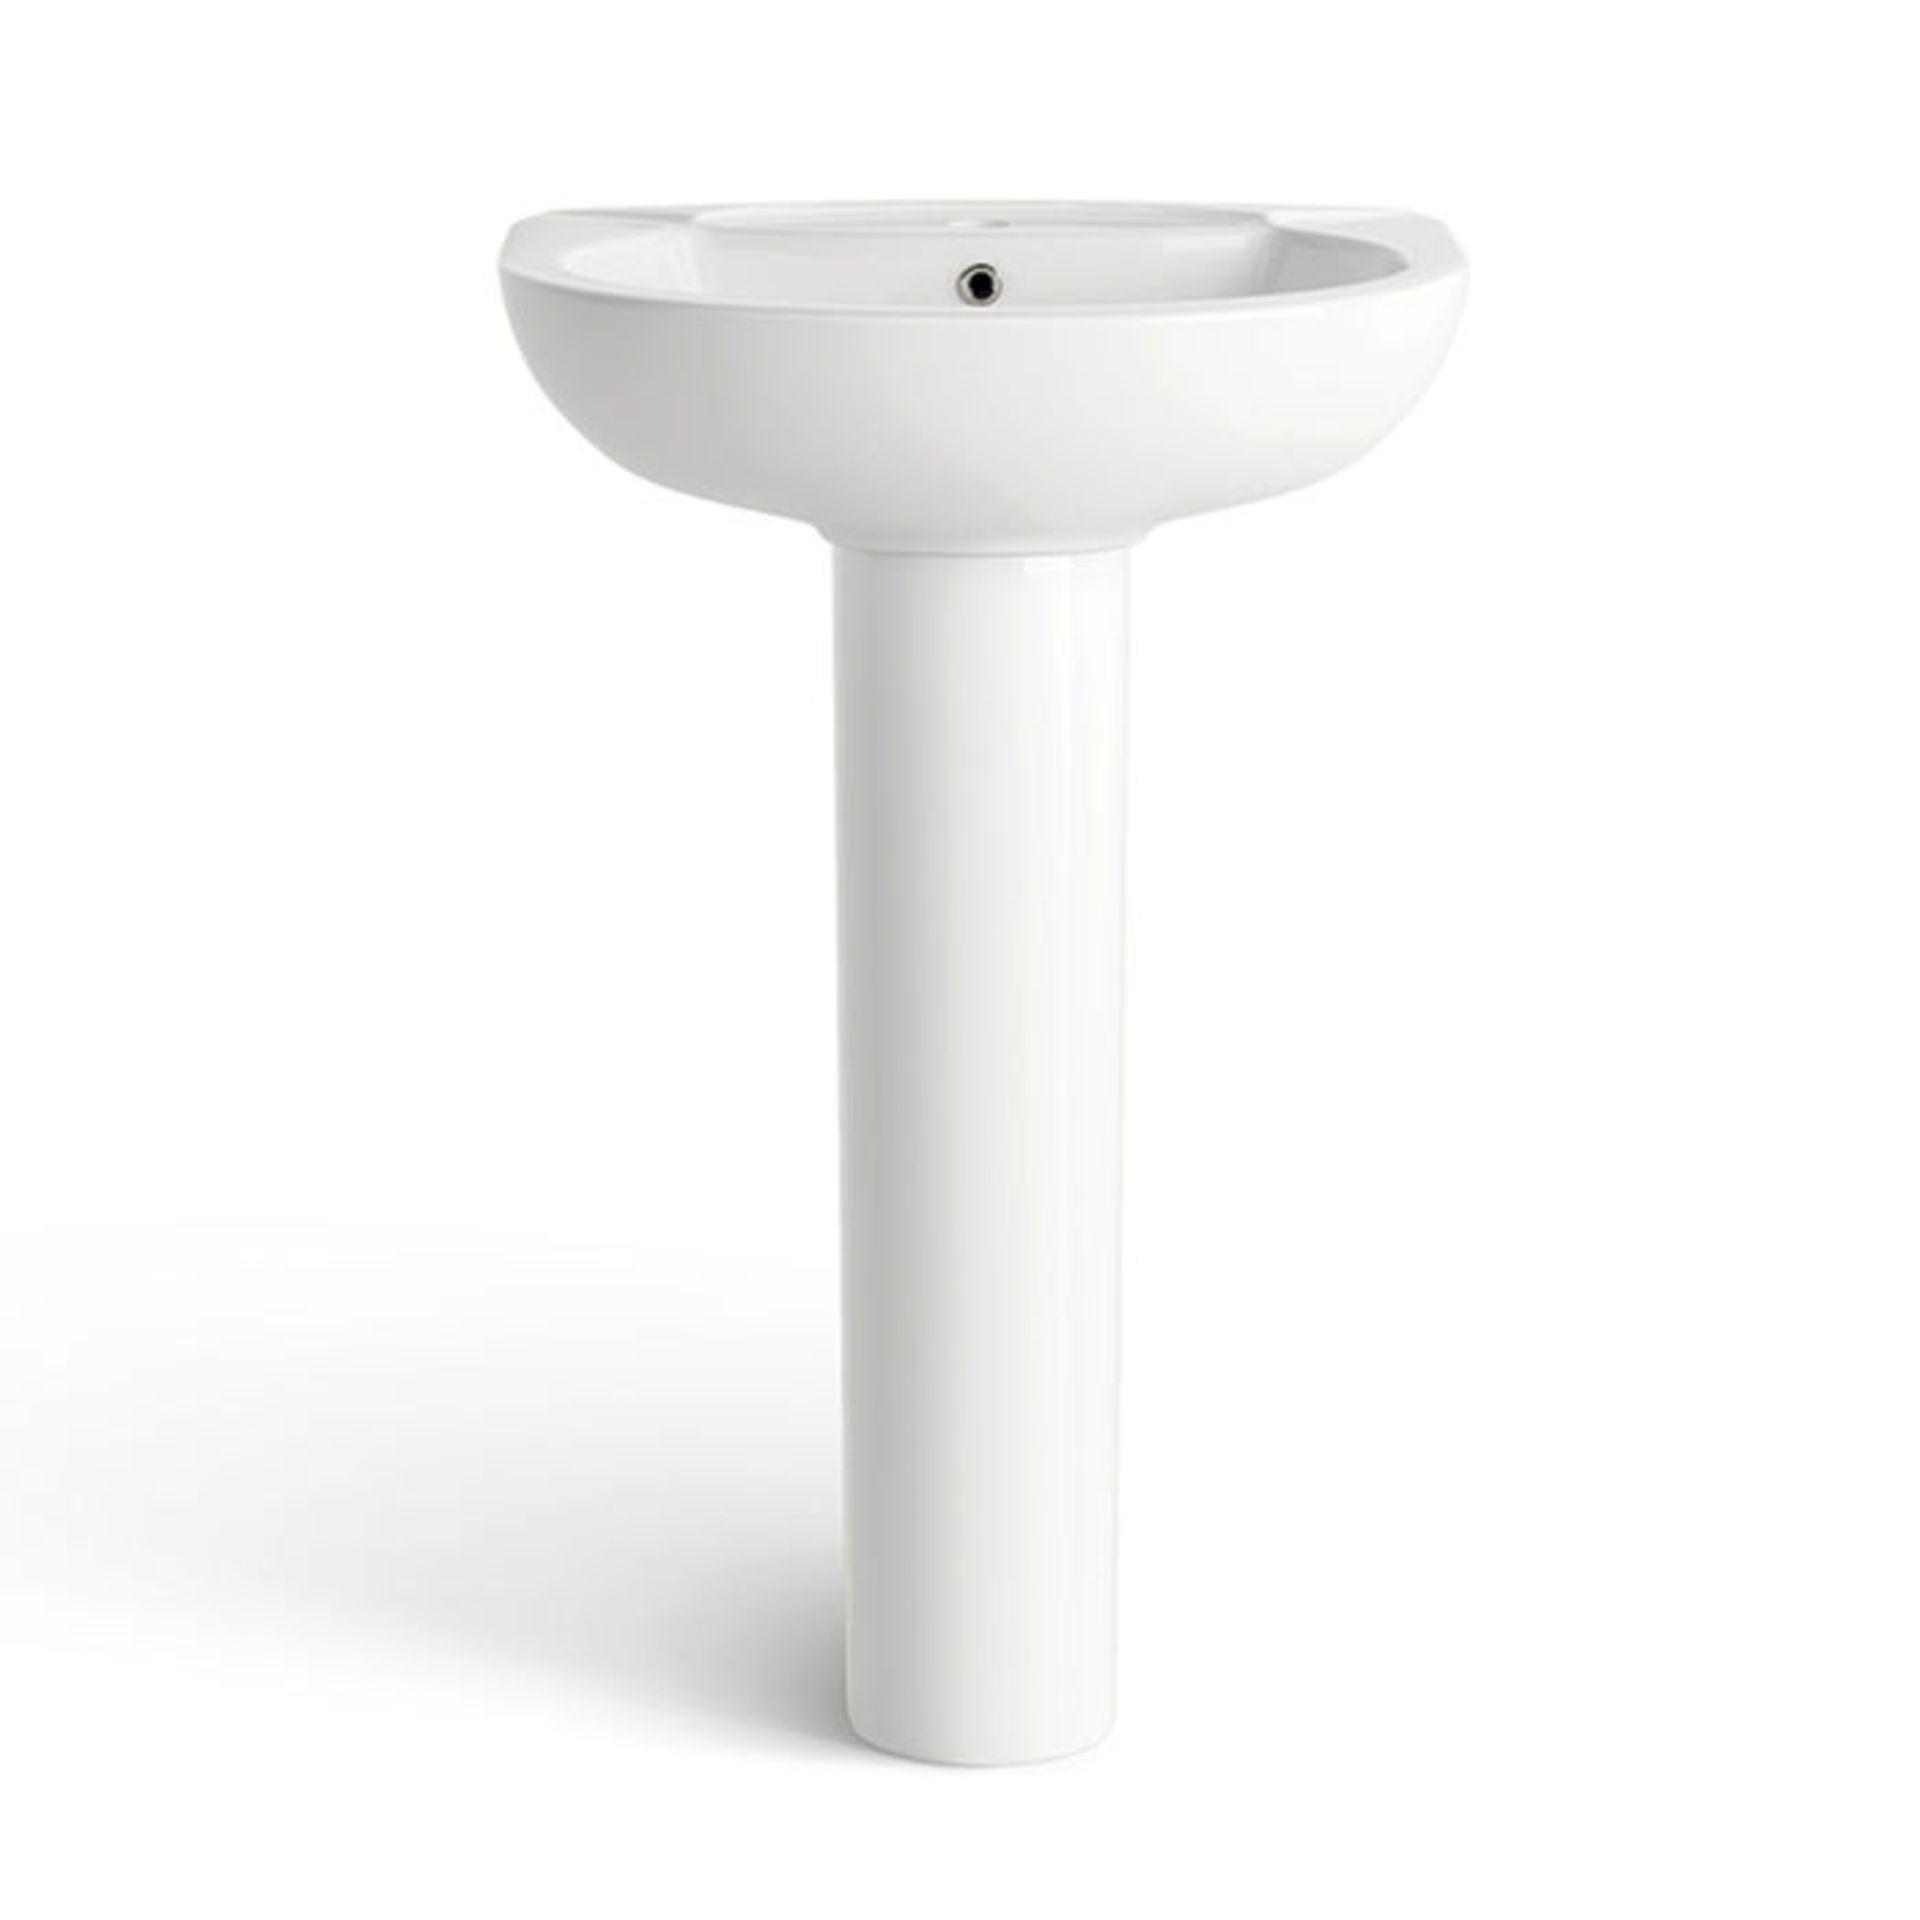 Sink & Pedestal - Single Tap Hole. Made from White Vitreous China and finished with a high glos... - Image 2 of 2